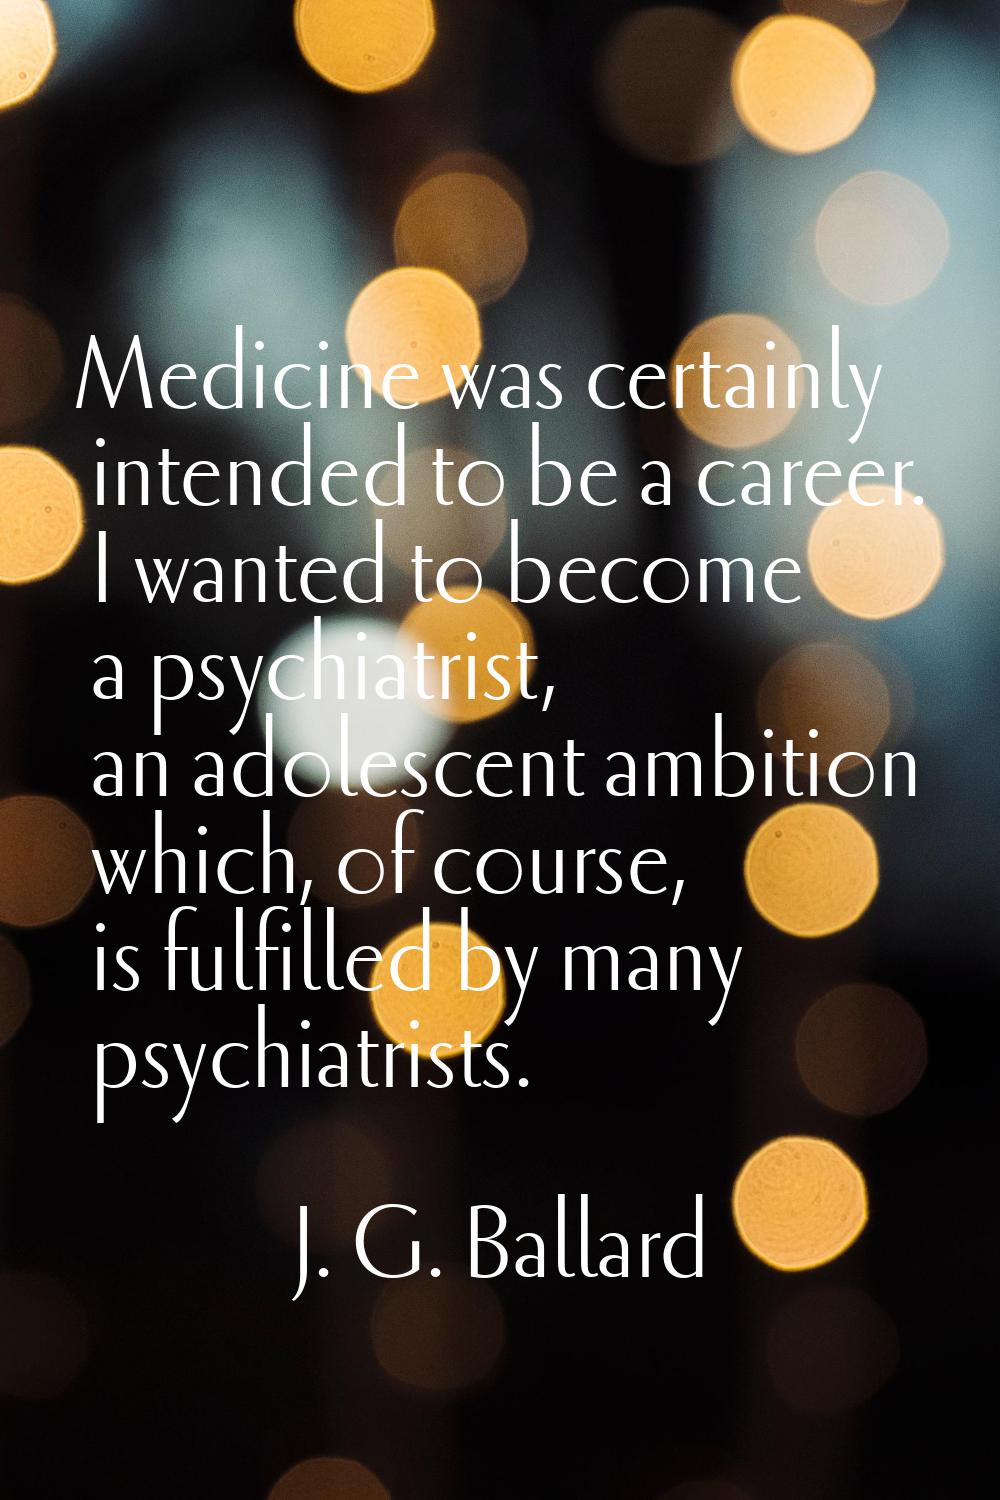 Medicine was certainly intended to be a career. I wanted to become a psychiatrist, an adolescent am